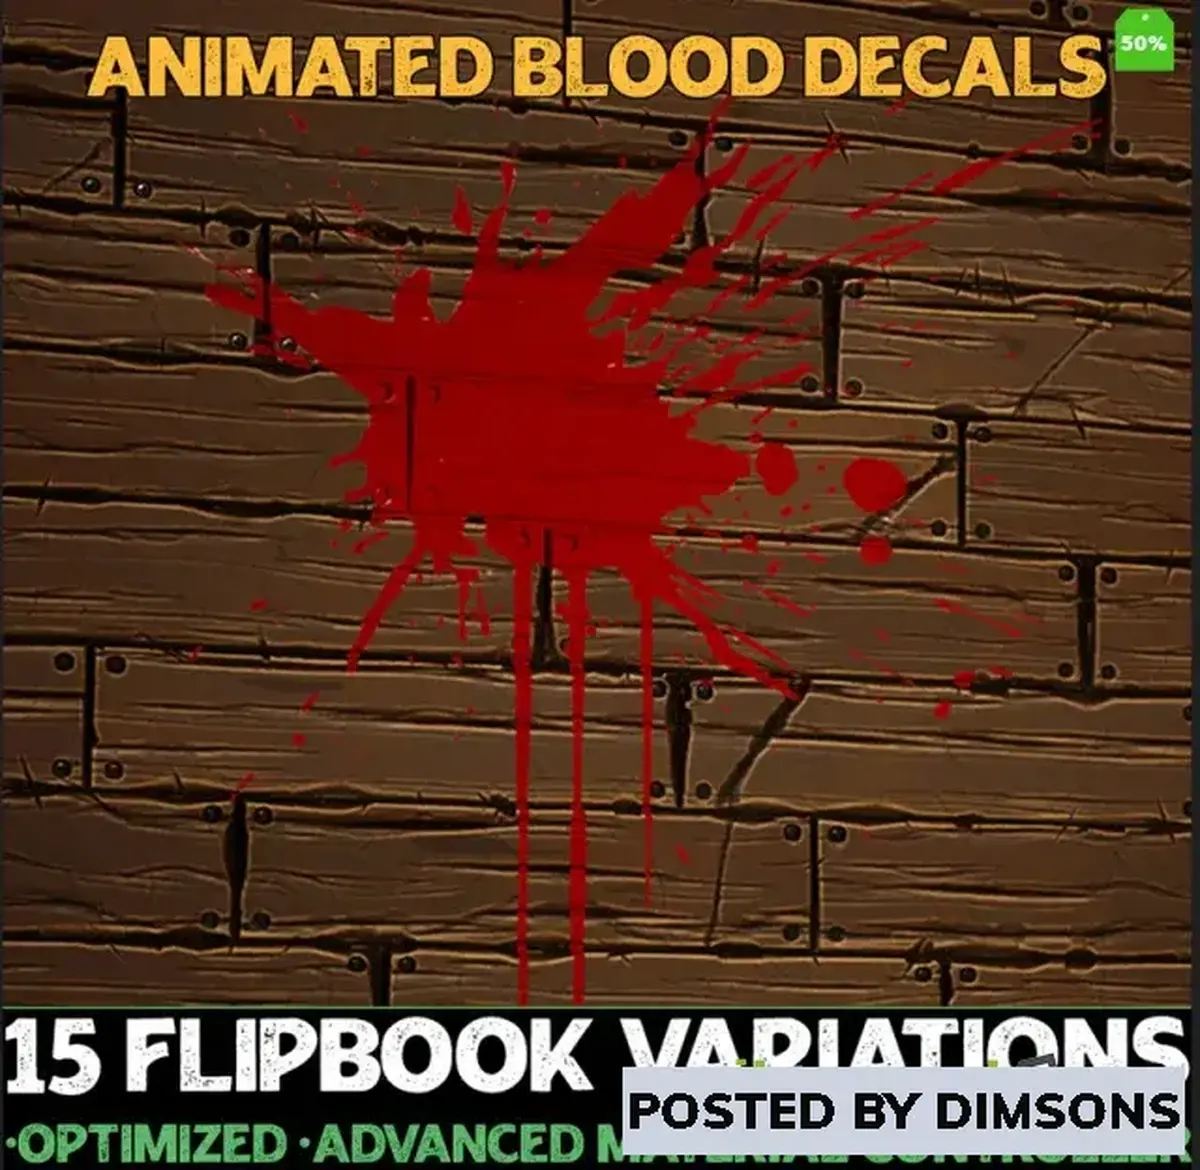 Unreal Engine 2D Assets Effects - Stylized Animated Blood Decals v4.19+